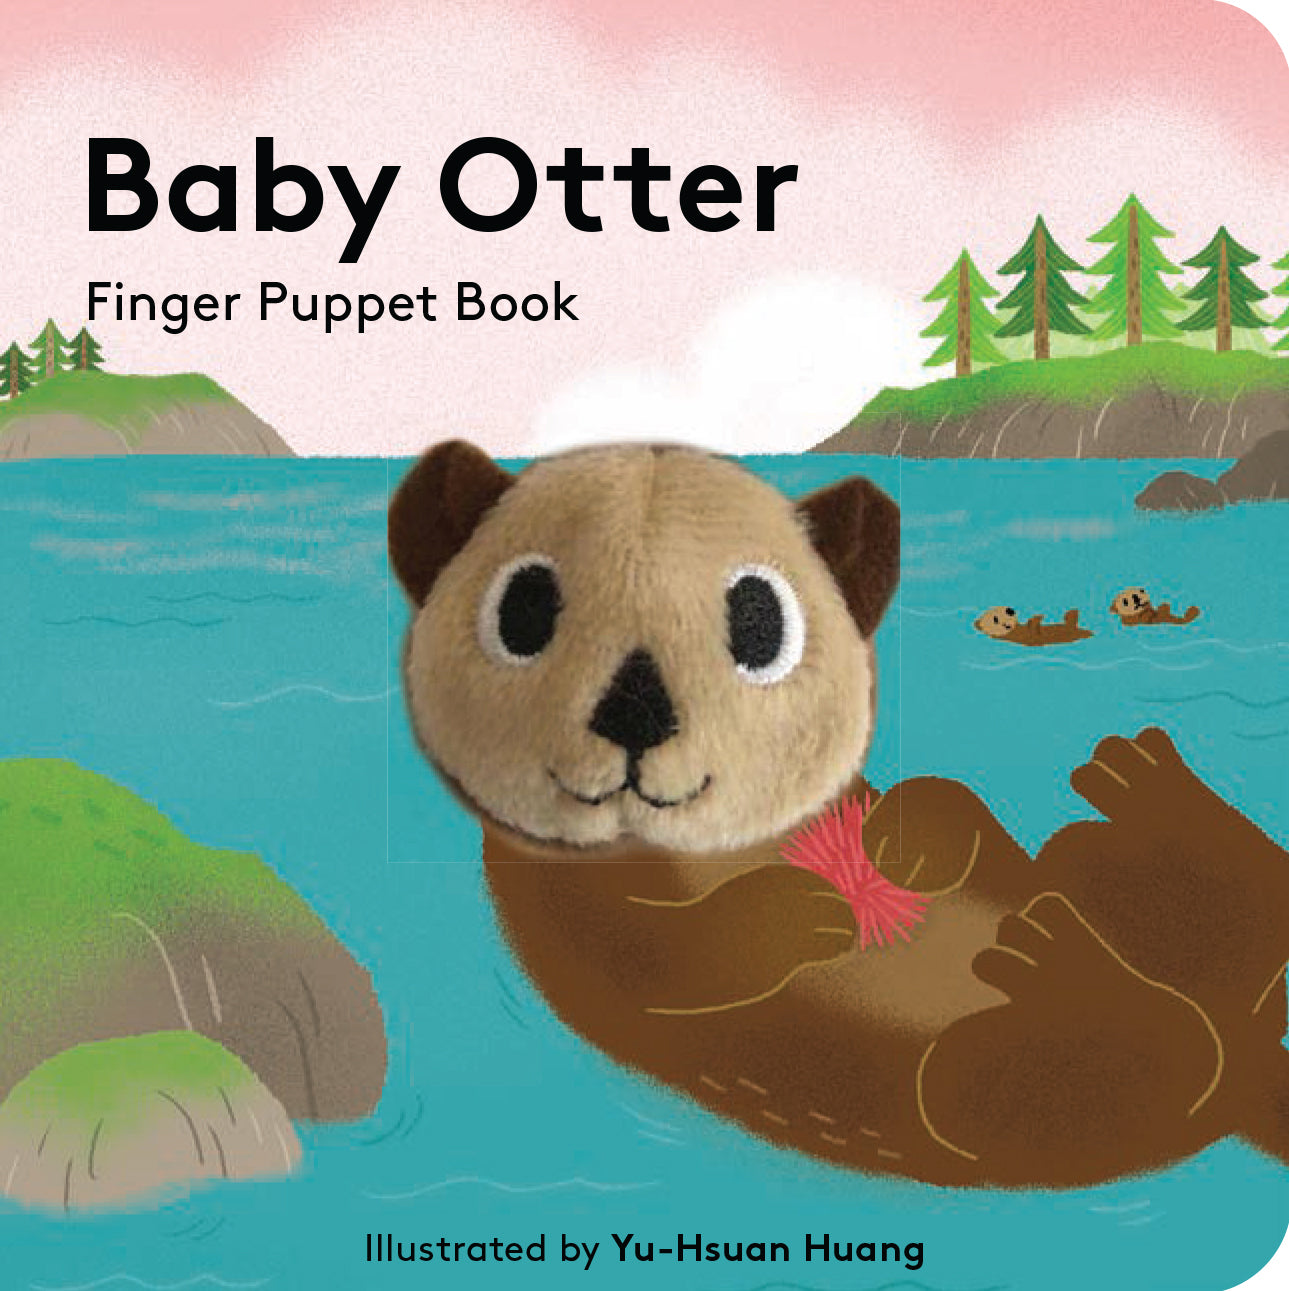 Little puppet book with the story of a baby otter.  For very young children.